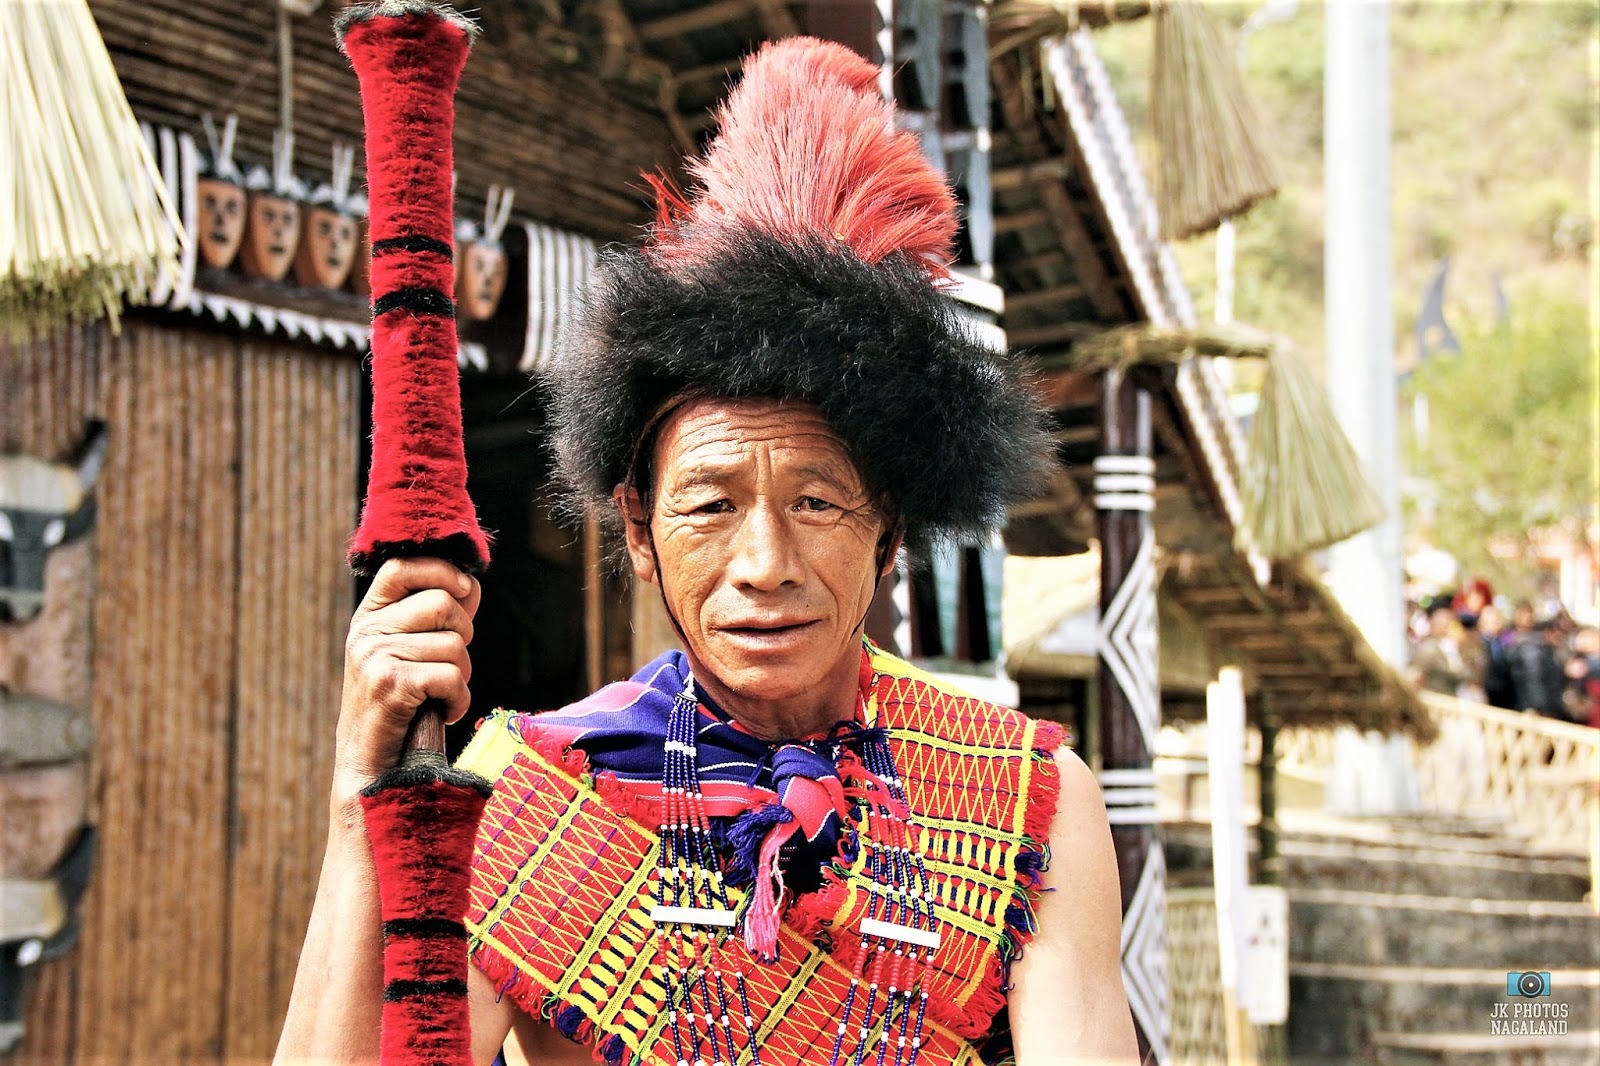 mythologies of the Liangma tribe – Indigenous Peoples Literature